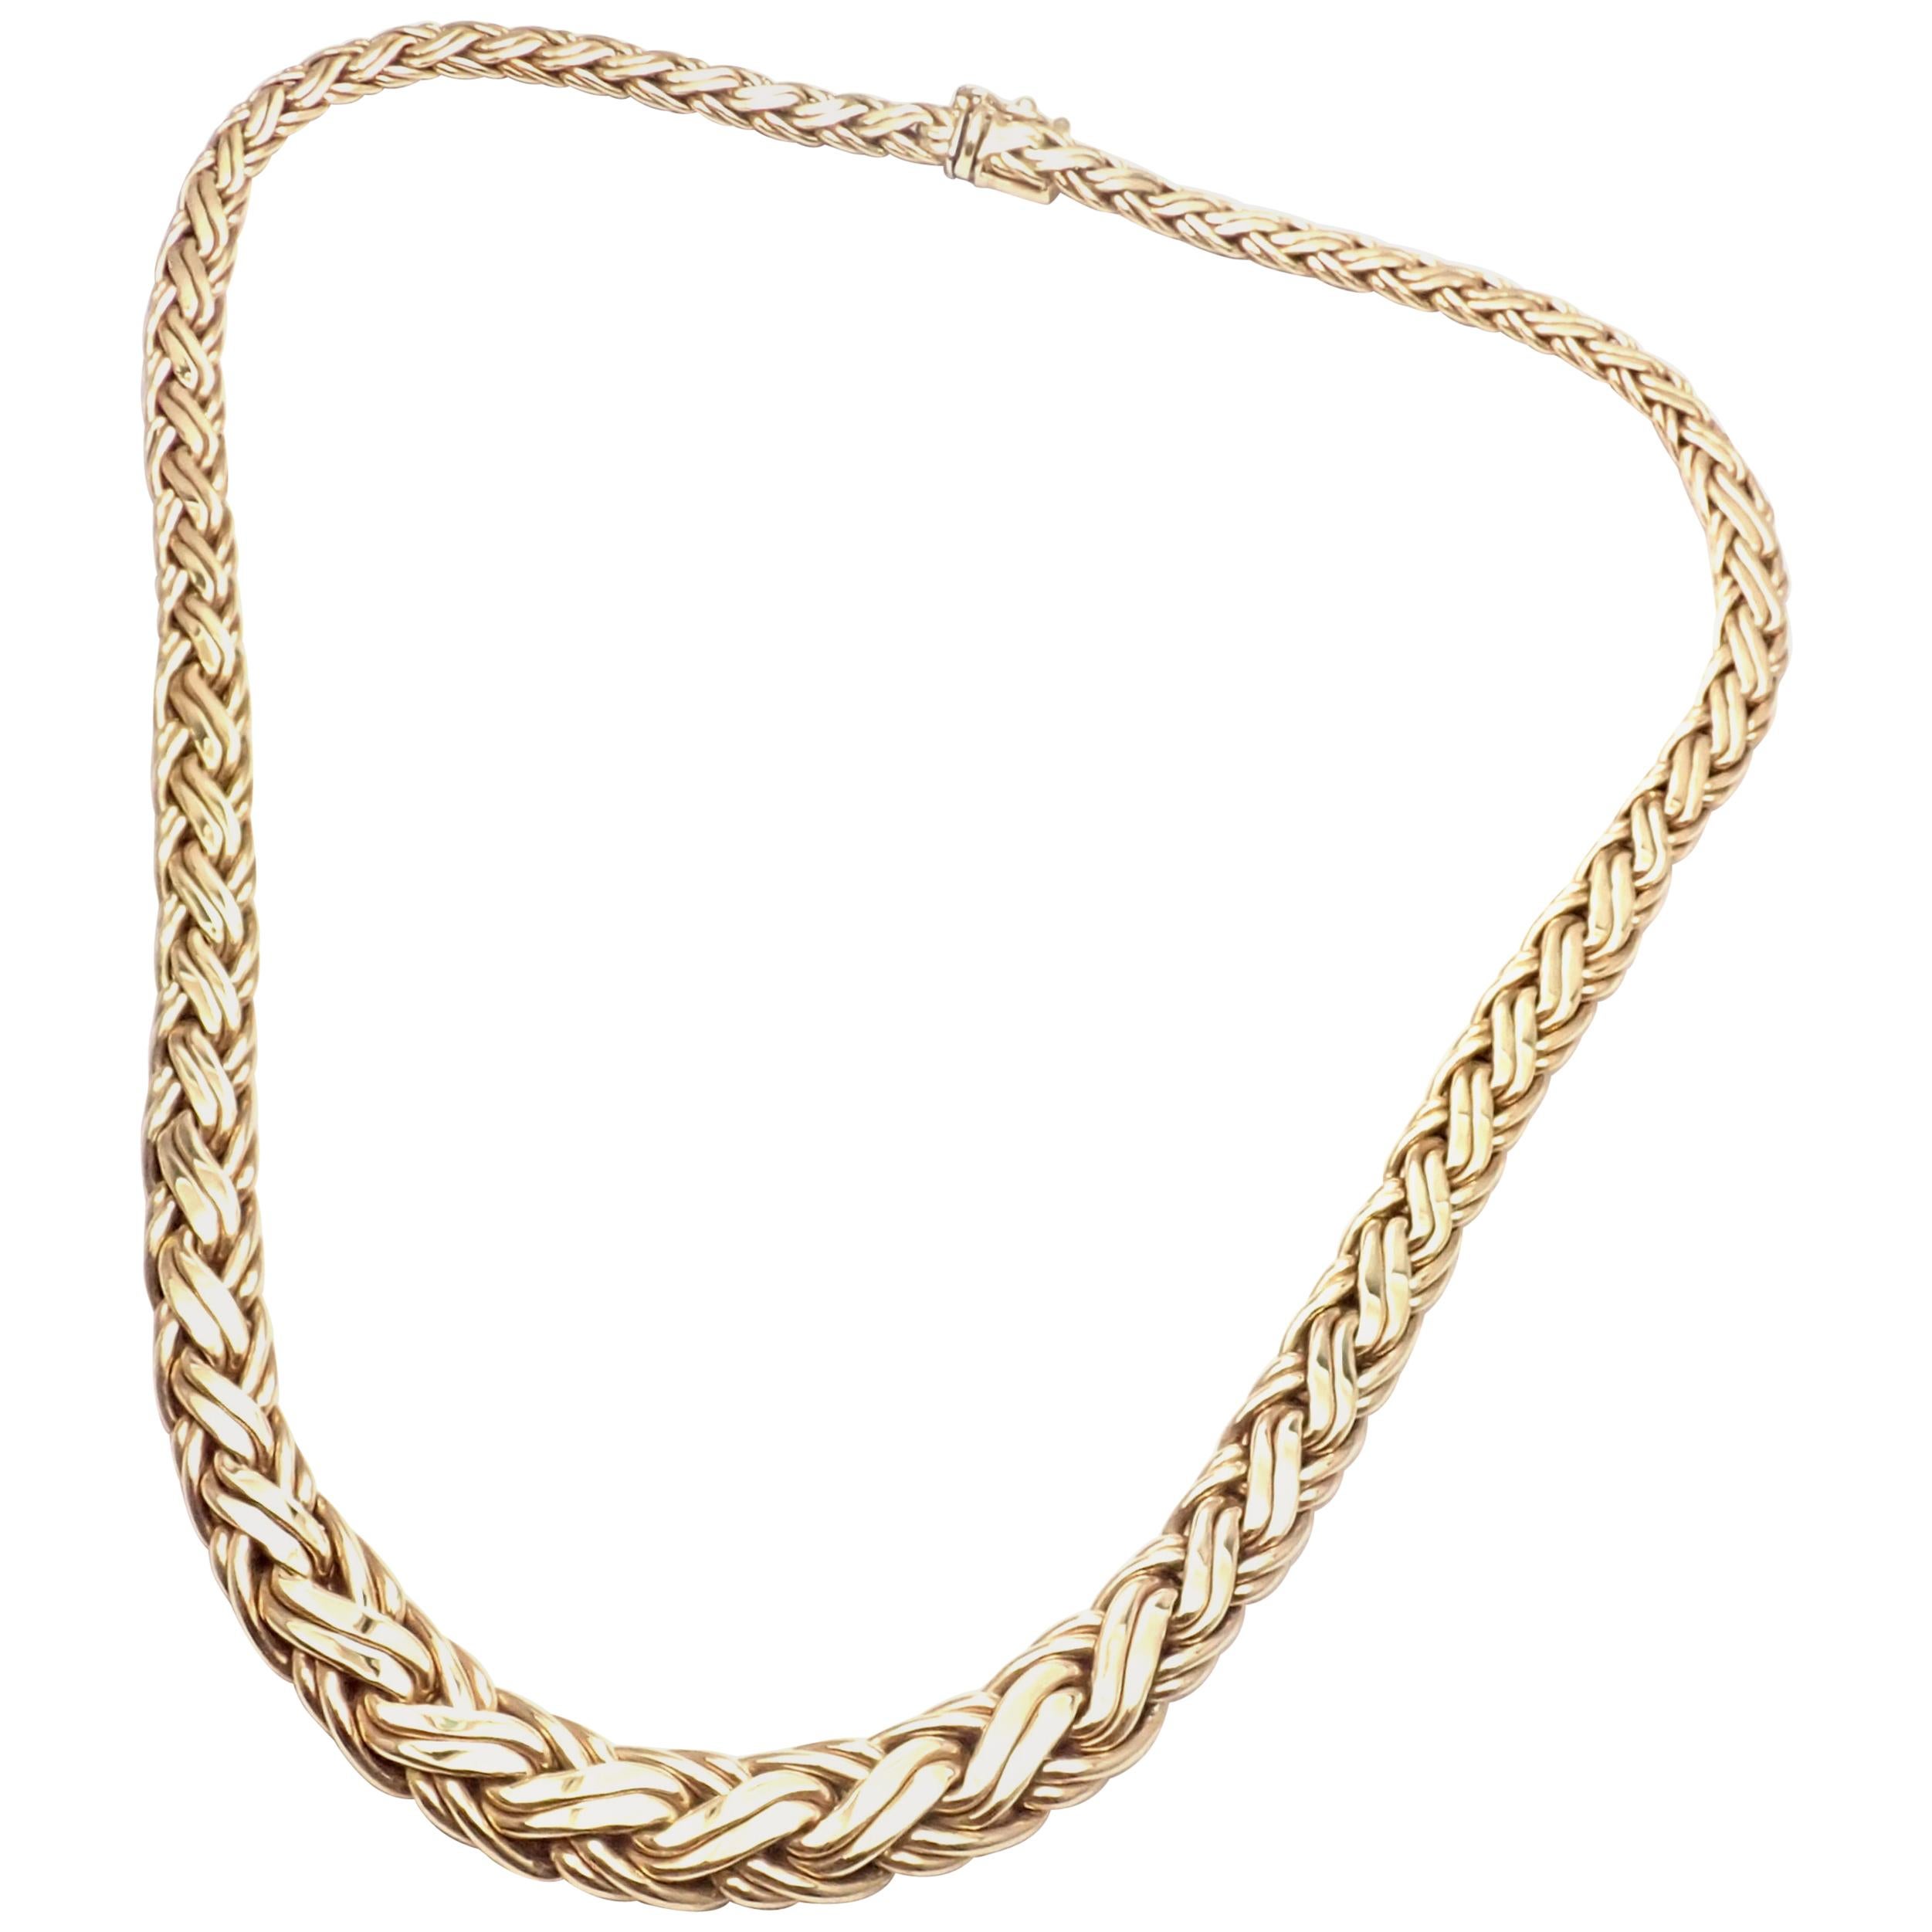 Tiffany & Co. Russian Weave Gradual Yellow Gold Link Necklace